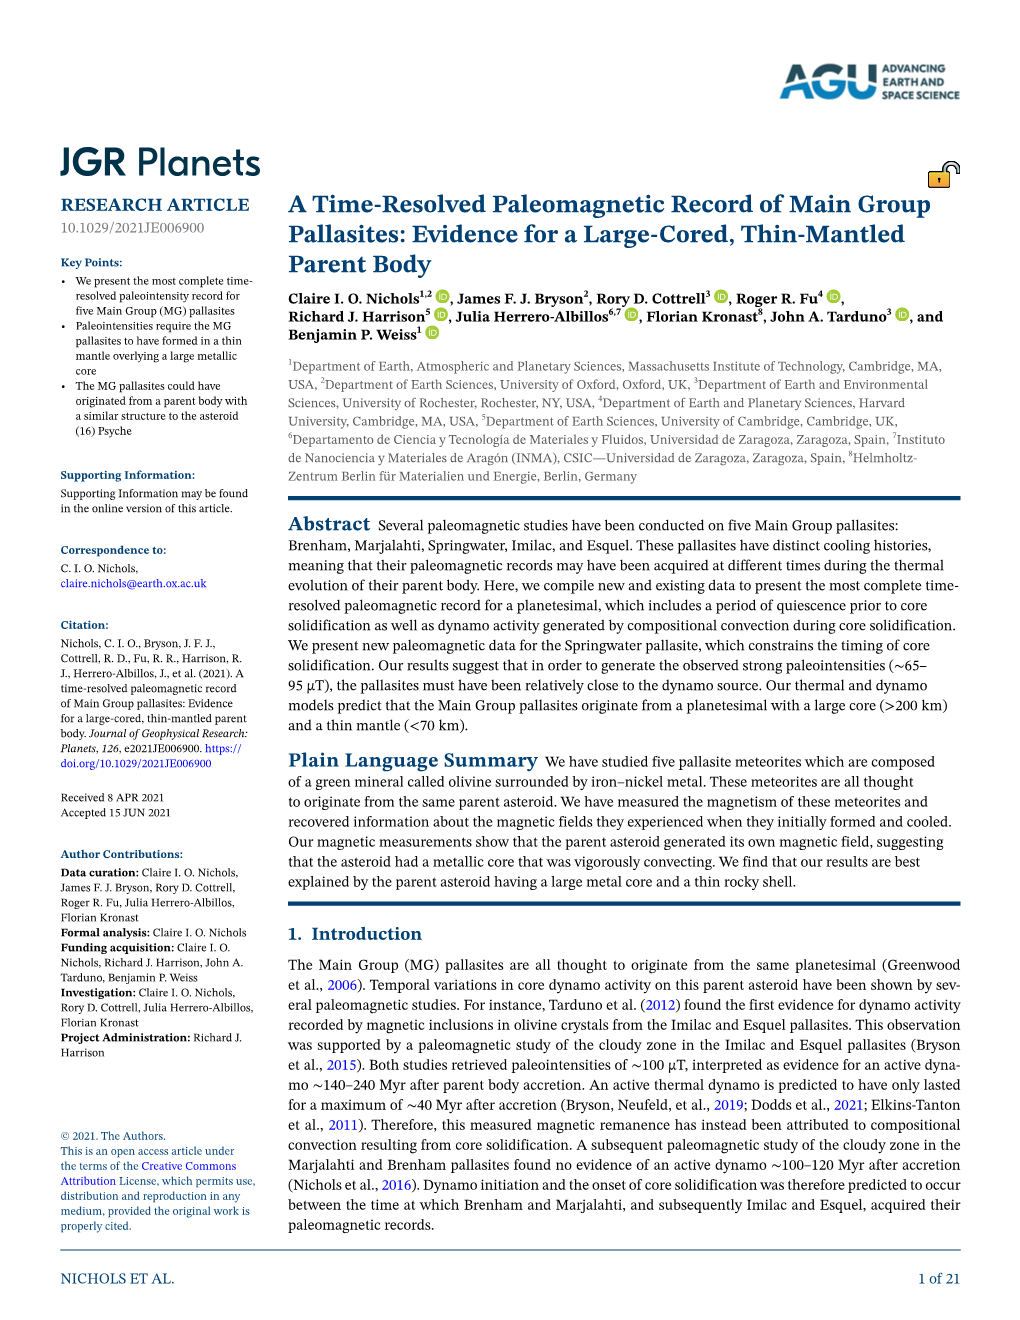 A Time‐Resolved Paleomagnetic Record of Main Group Pallasites